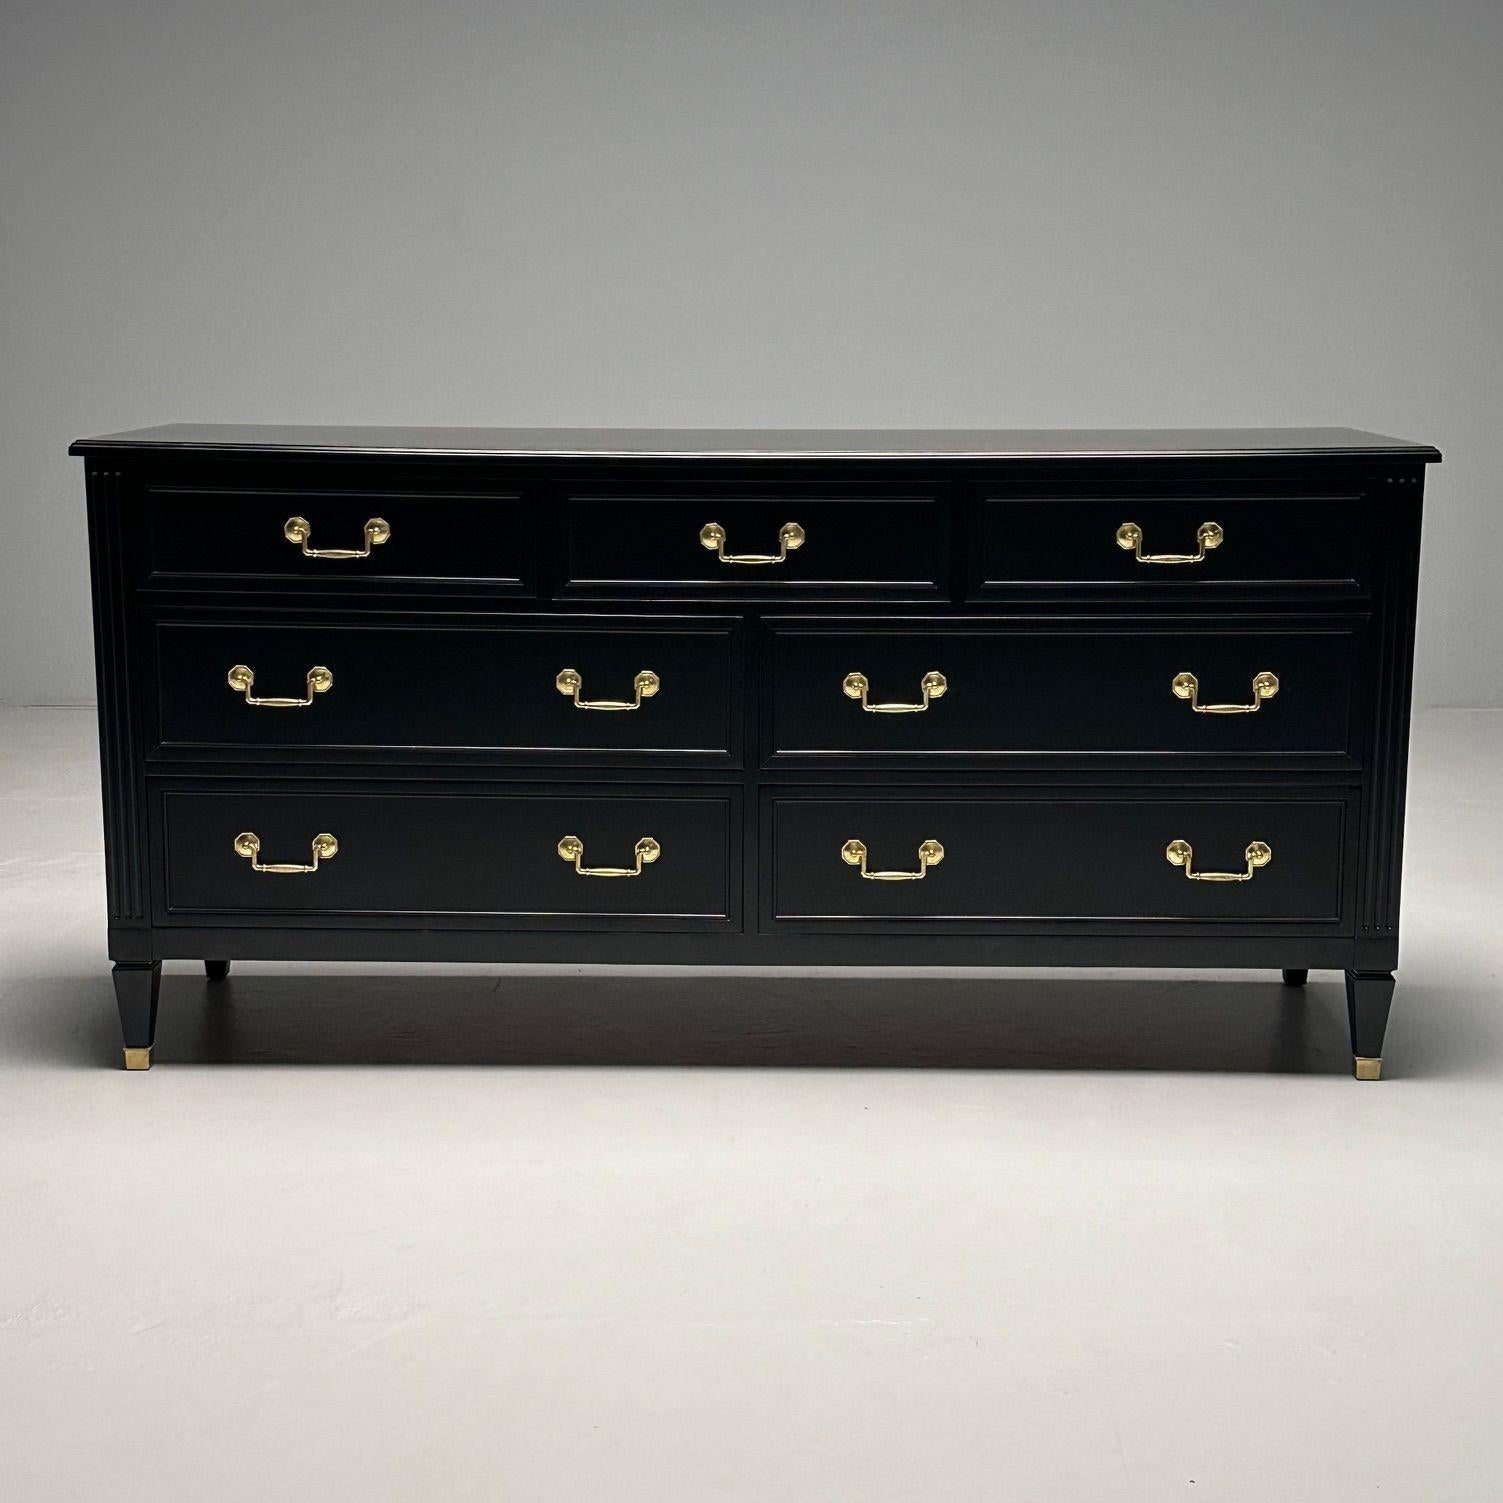 Kindel, Hollywood Regency Style, Dresser, Matte Black, Brass, USA, 1970s

Mid-century dresser manufactured by Kindel in the United States circa 1960s. Fully refinished in matte black. Original brass square drawer pulls on each of the 7 drawers.